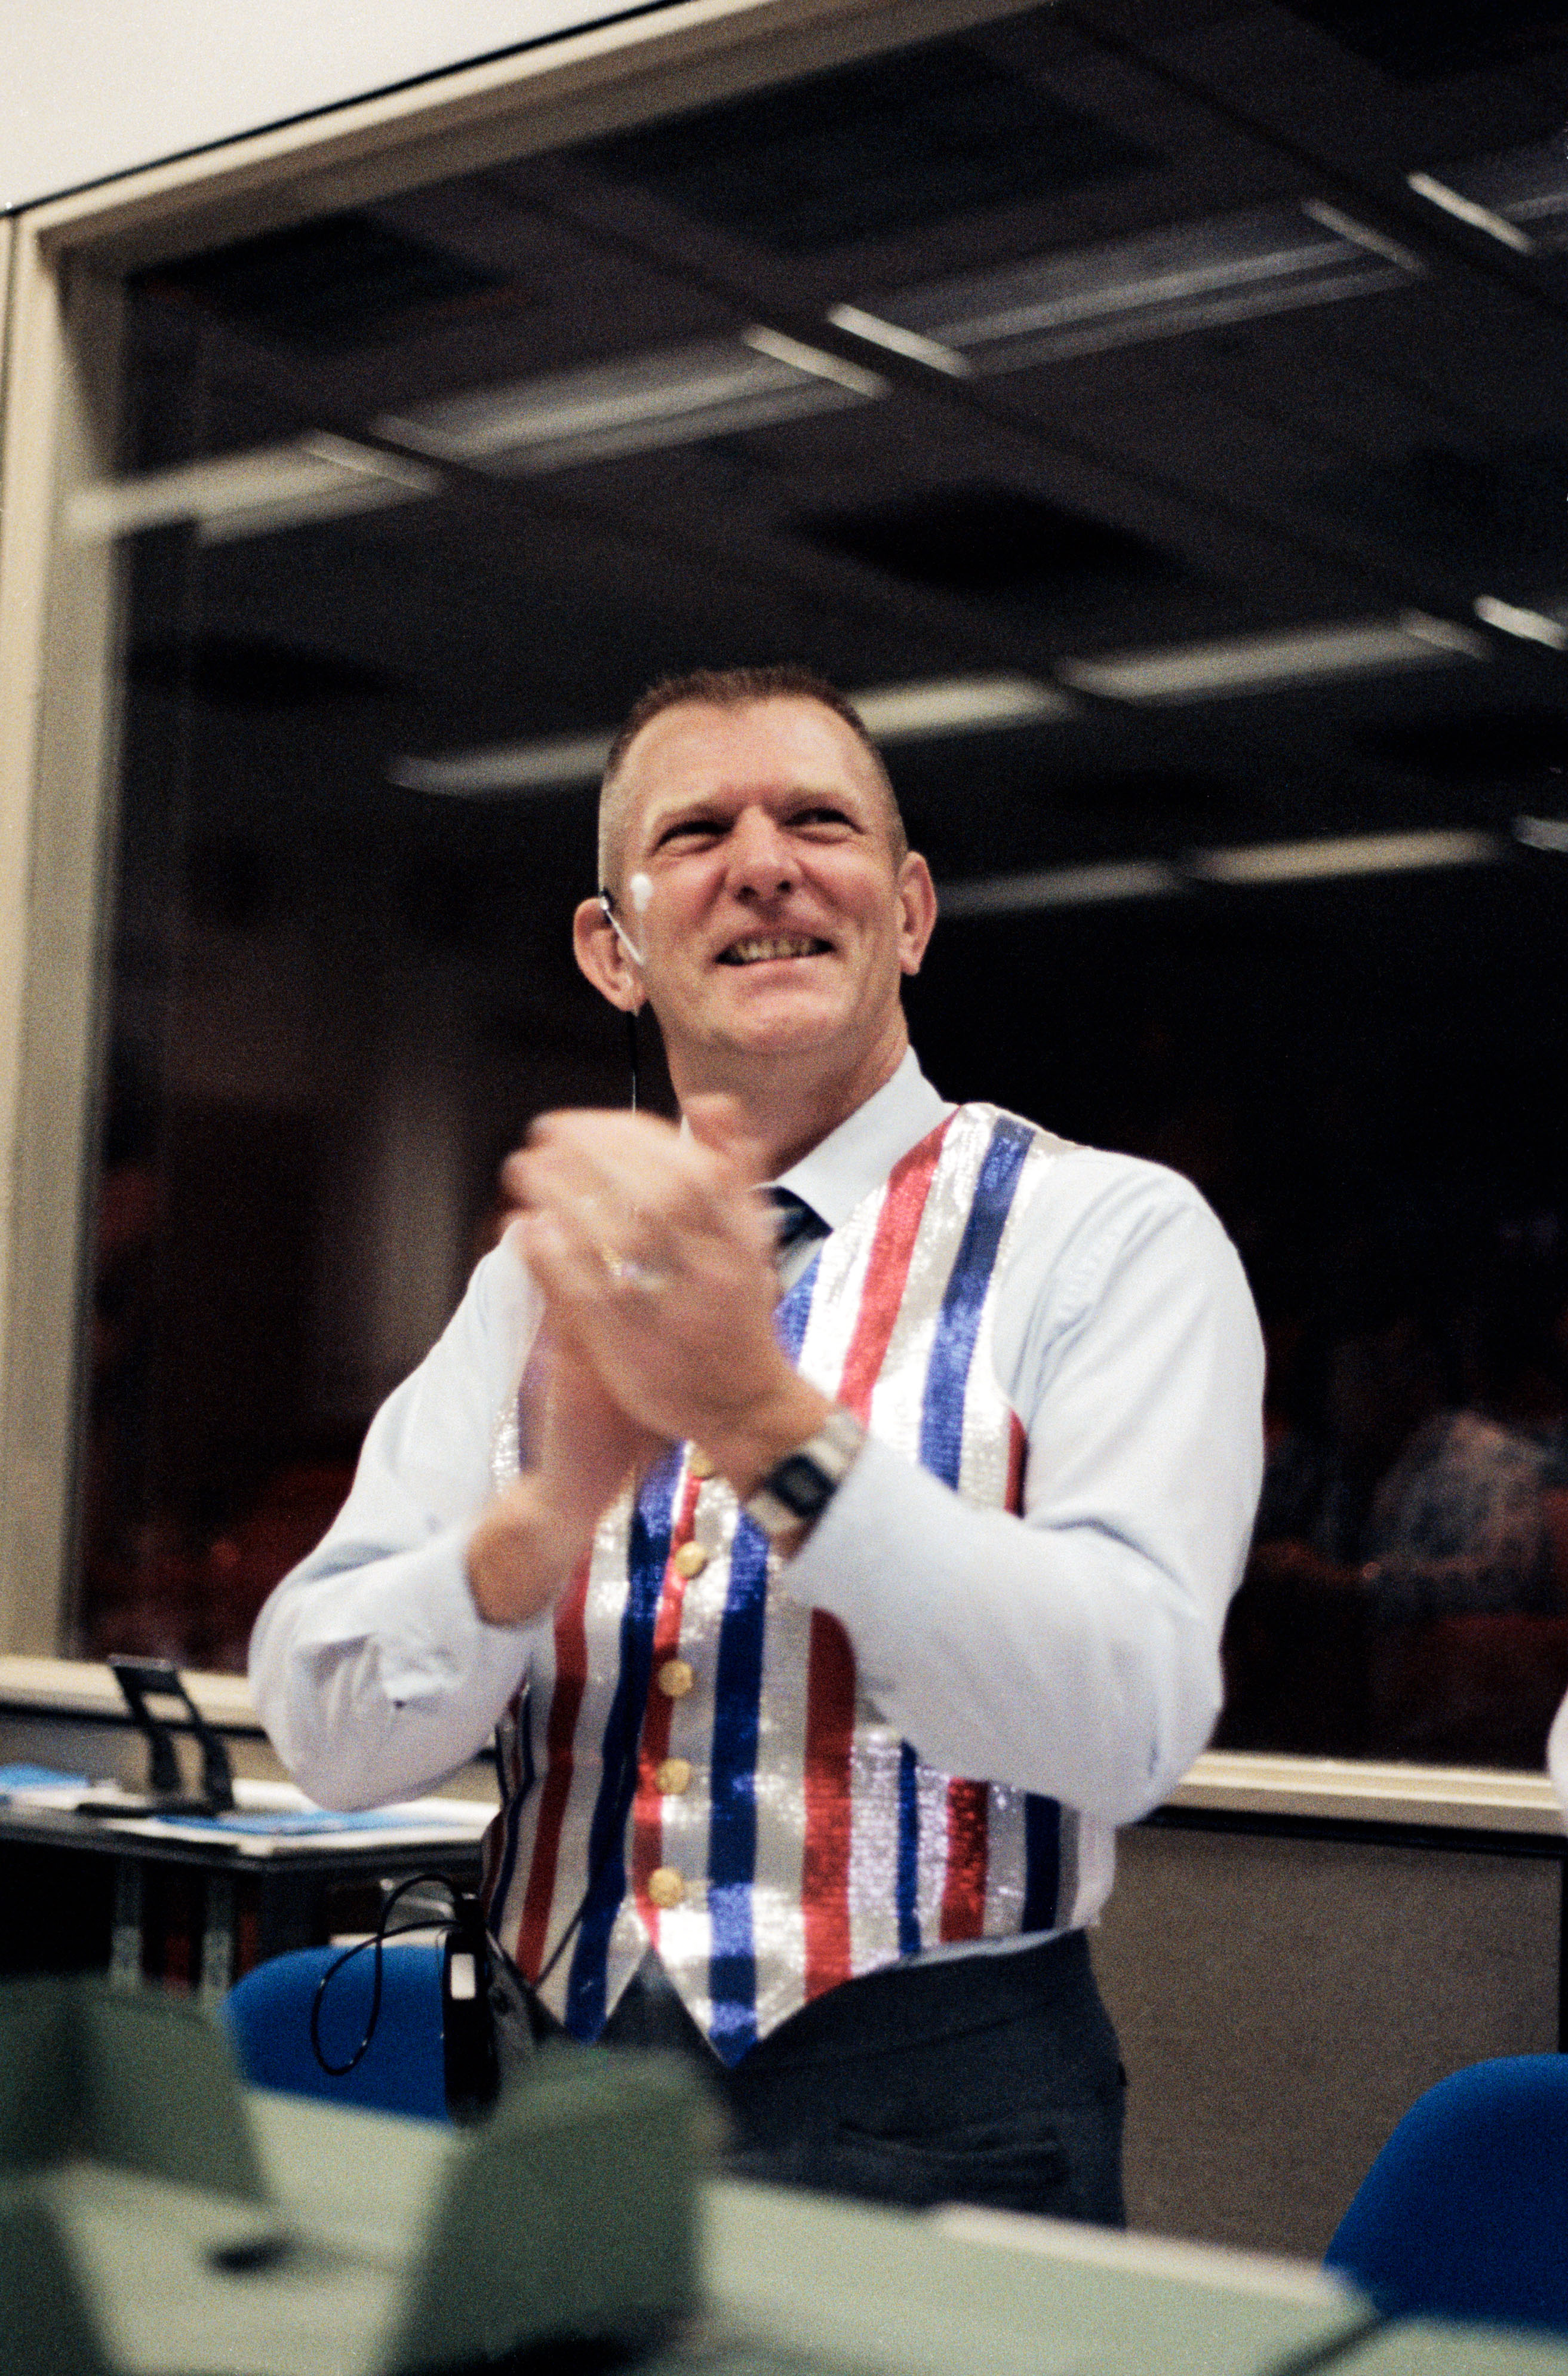 In Mission Control at NASA’s Johnson Space Center in Houston, Lead STS-41C Flight Director Eugene F. Kranz applauds the successful landing of STS-41C